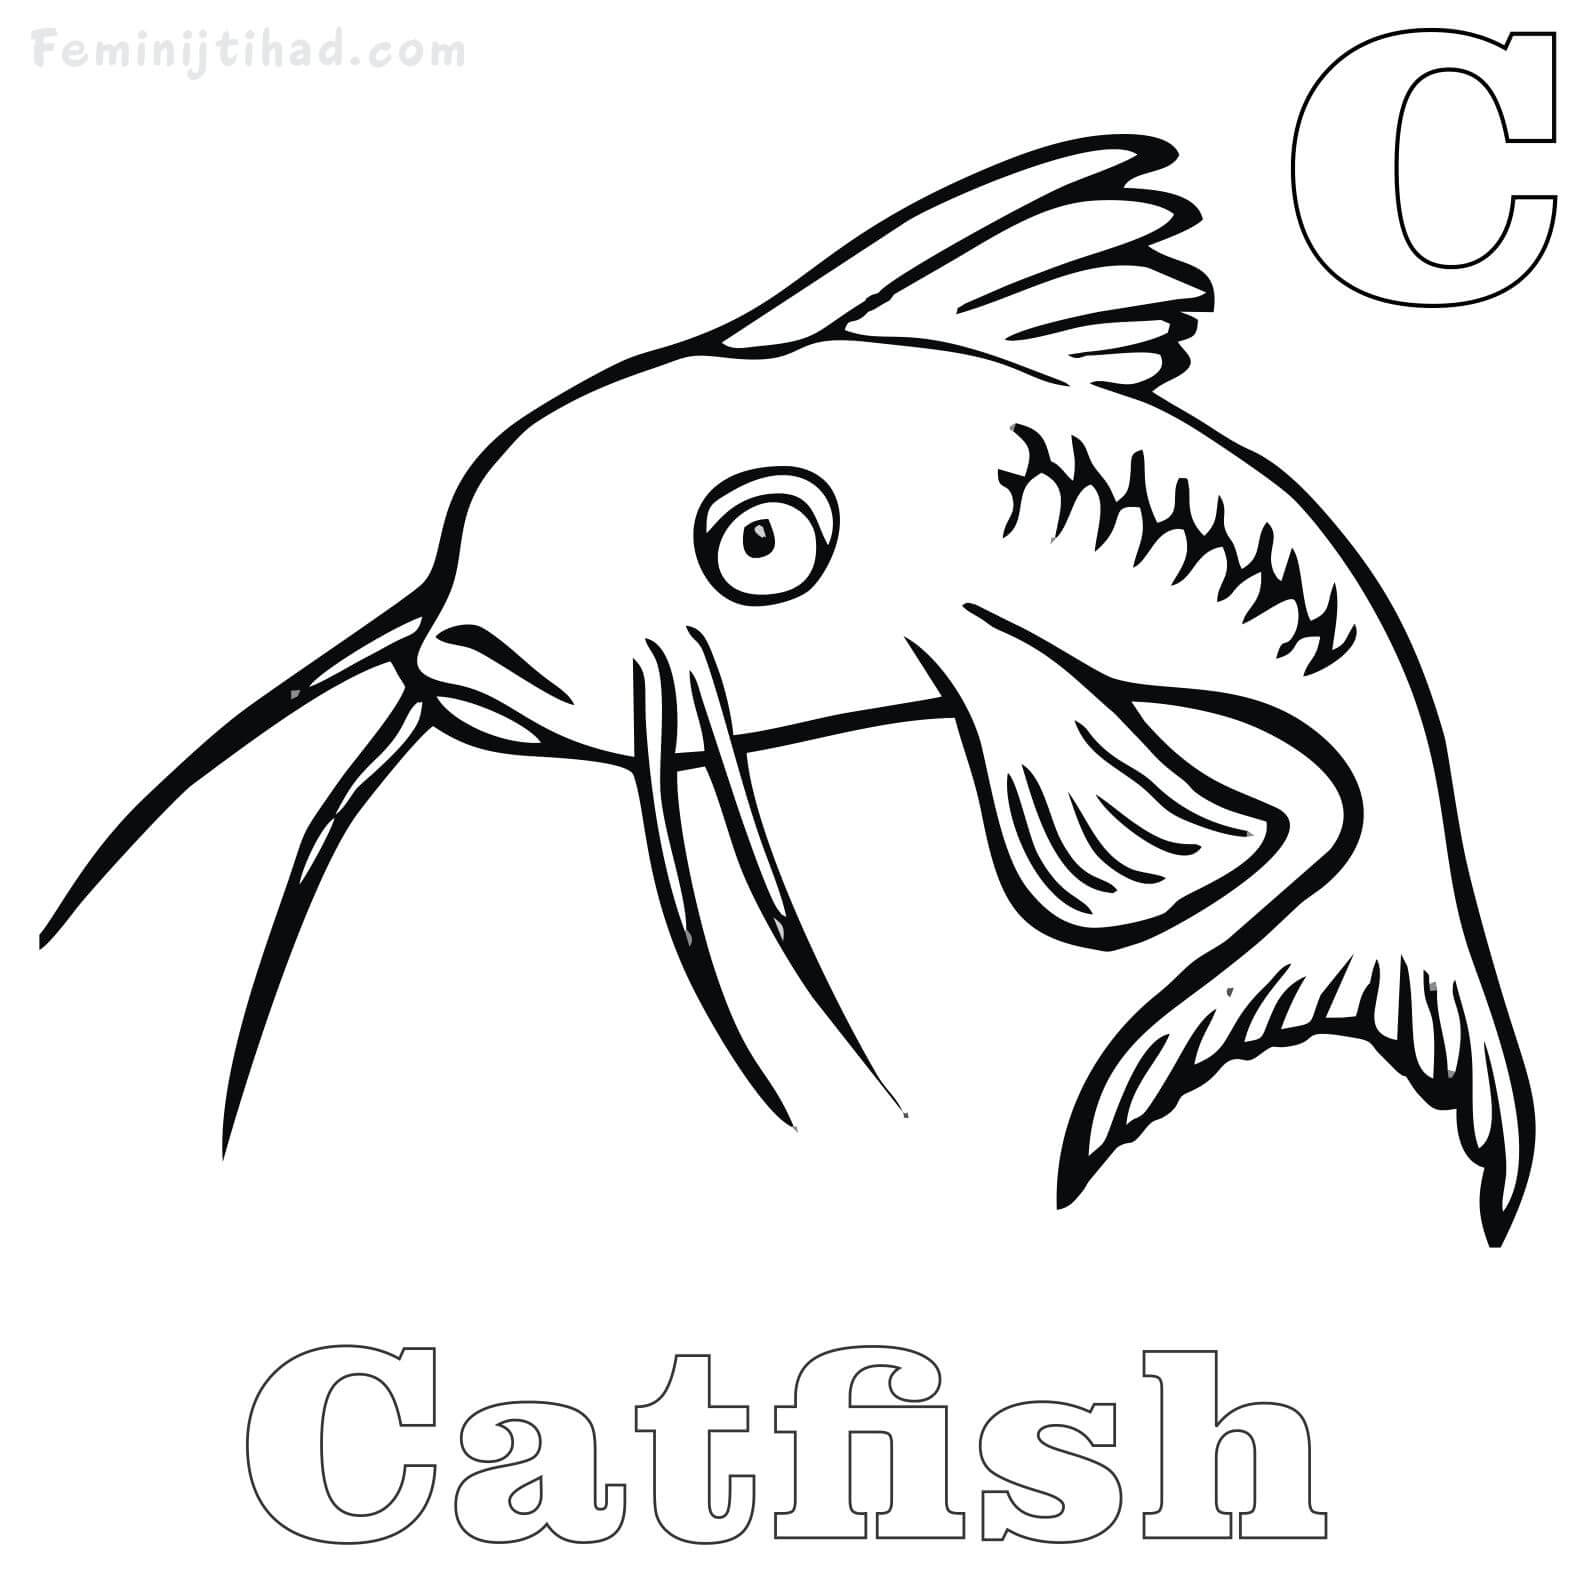 coloring page of catfish